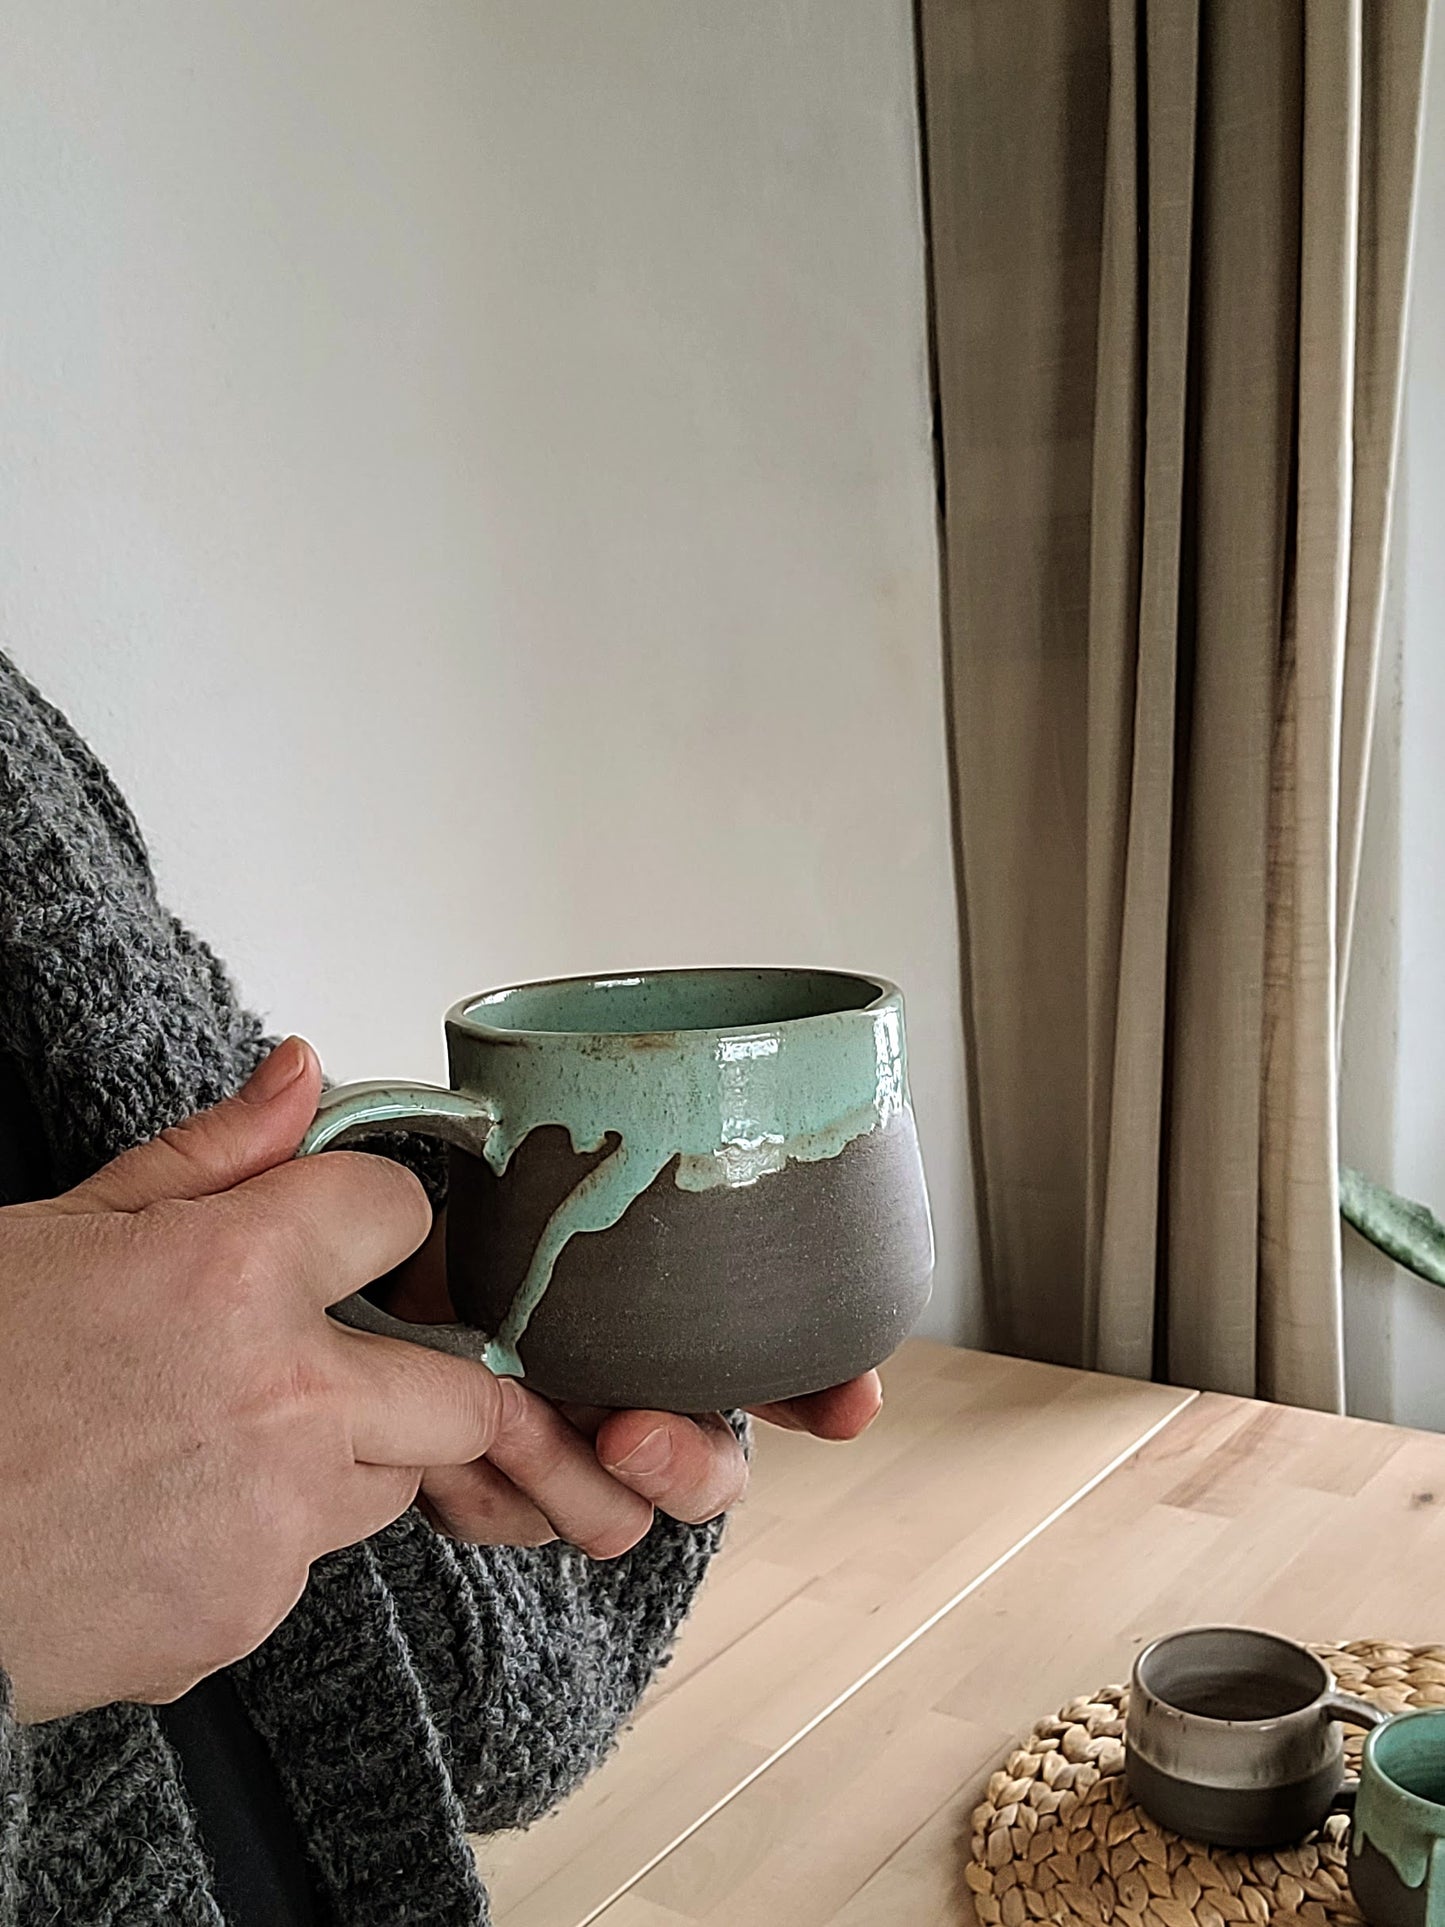 Looking for a great-looking mug to match your morning coffee? This ceramic mug is made in modern minimalist style with a unique rustic finish. The durable stoneware construction with a speckled glaze will handle both hot and cold liquids and special occasions alike.